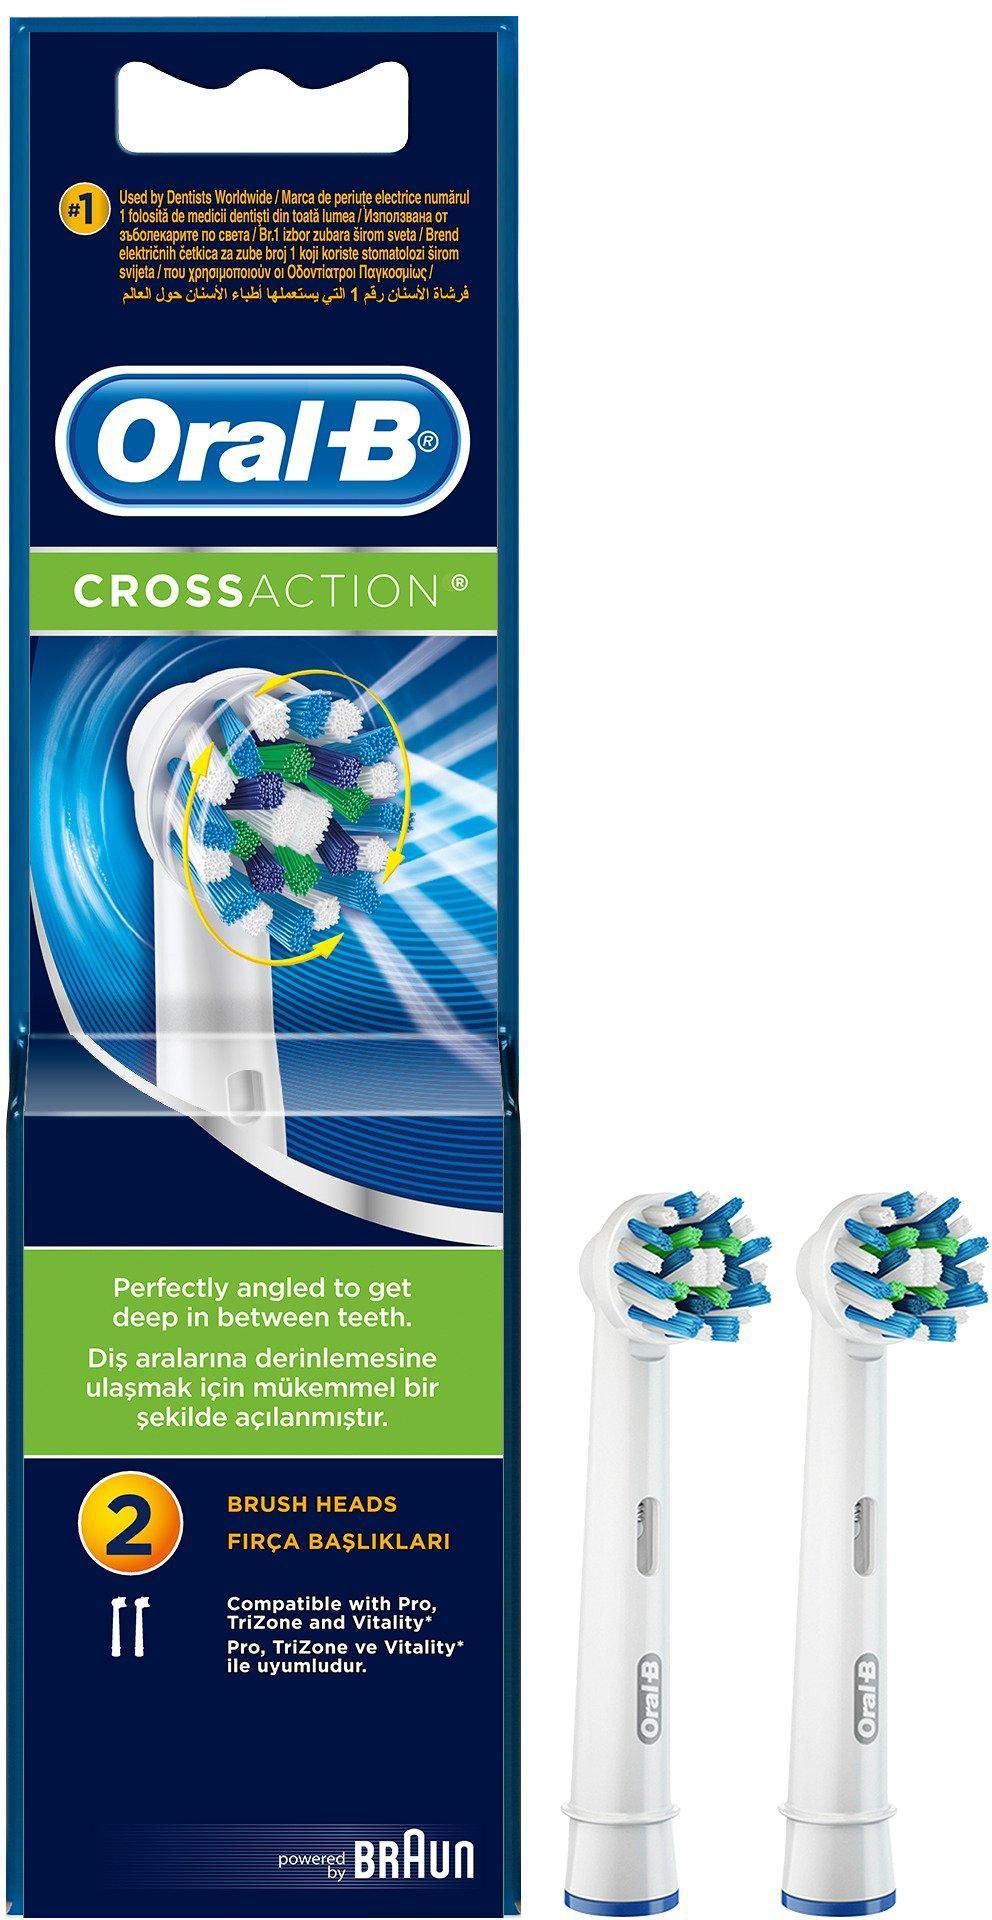 ORAL-B Cross Action Replacement Head for Oral-B Electric Toothbrush